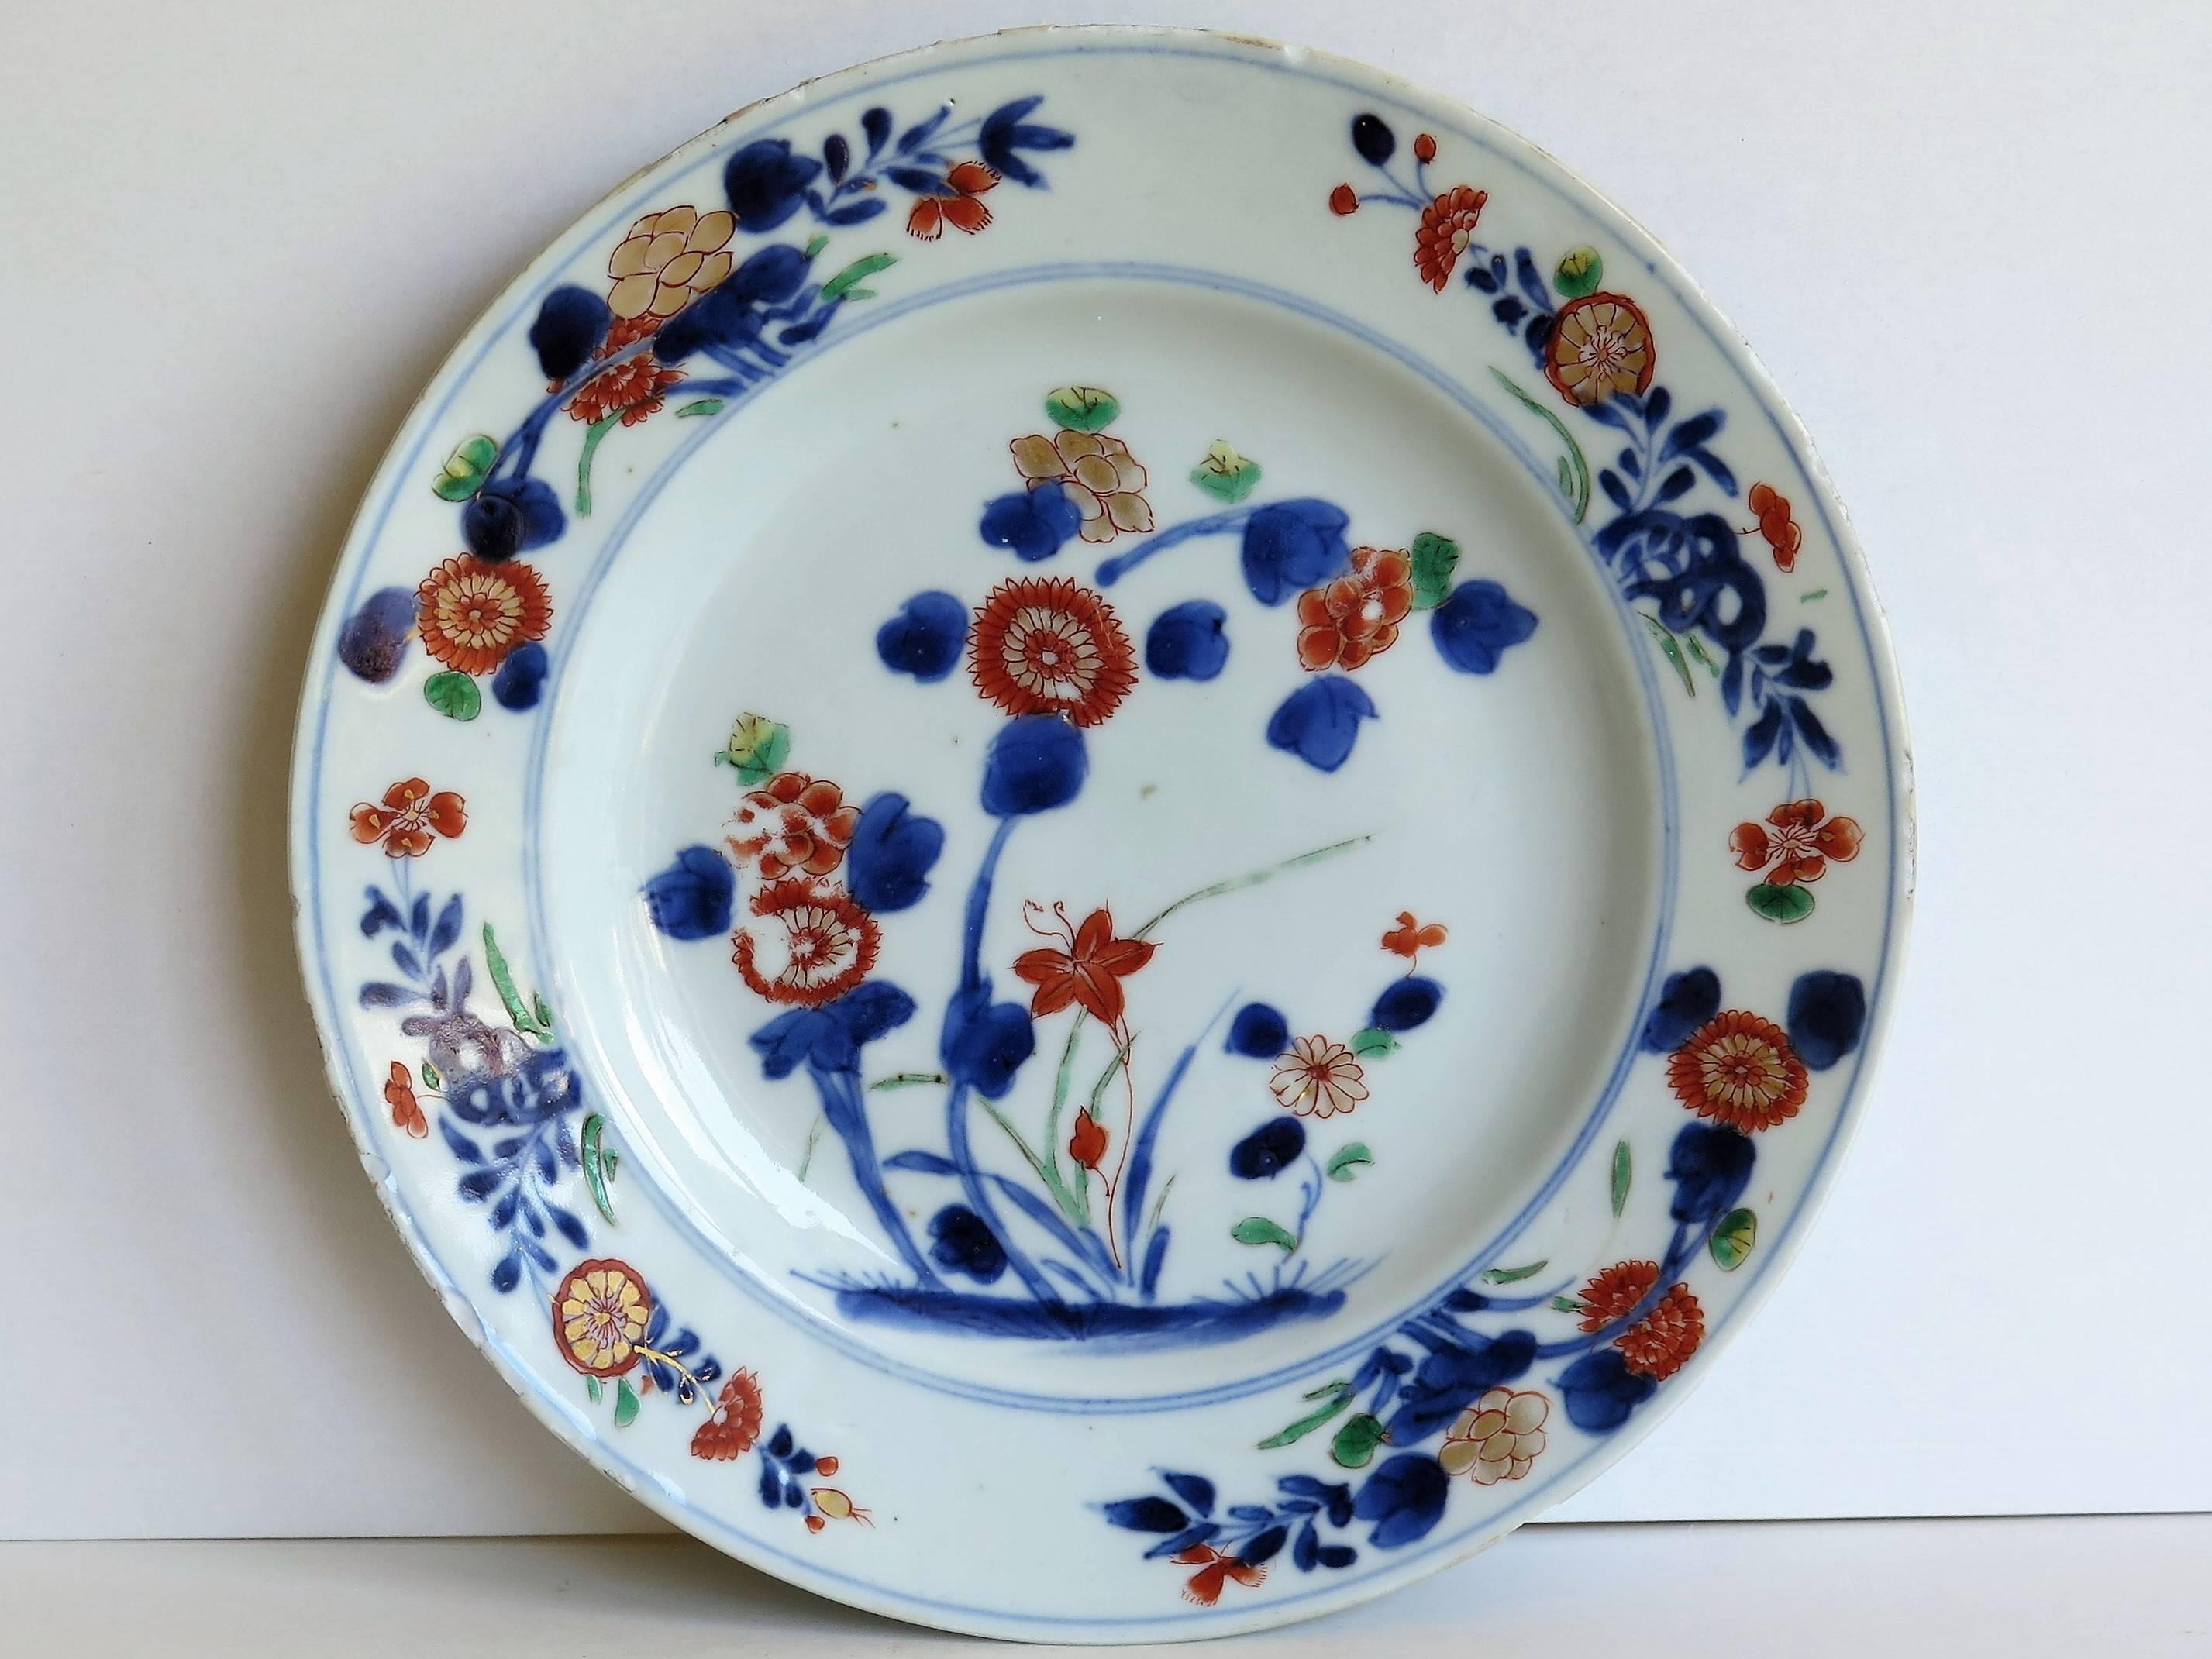 This is a fine Chinese porcelain Plate from the late 17th century or early 18th century, Qing, Kangxi period, Circa 1700.

The plate is well potted with a very neatly cut foot rim, the glaze being very white with a slight bluish tinge.

The plate